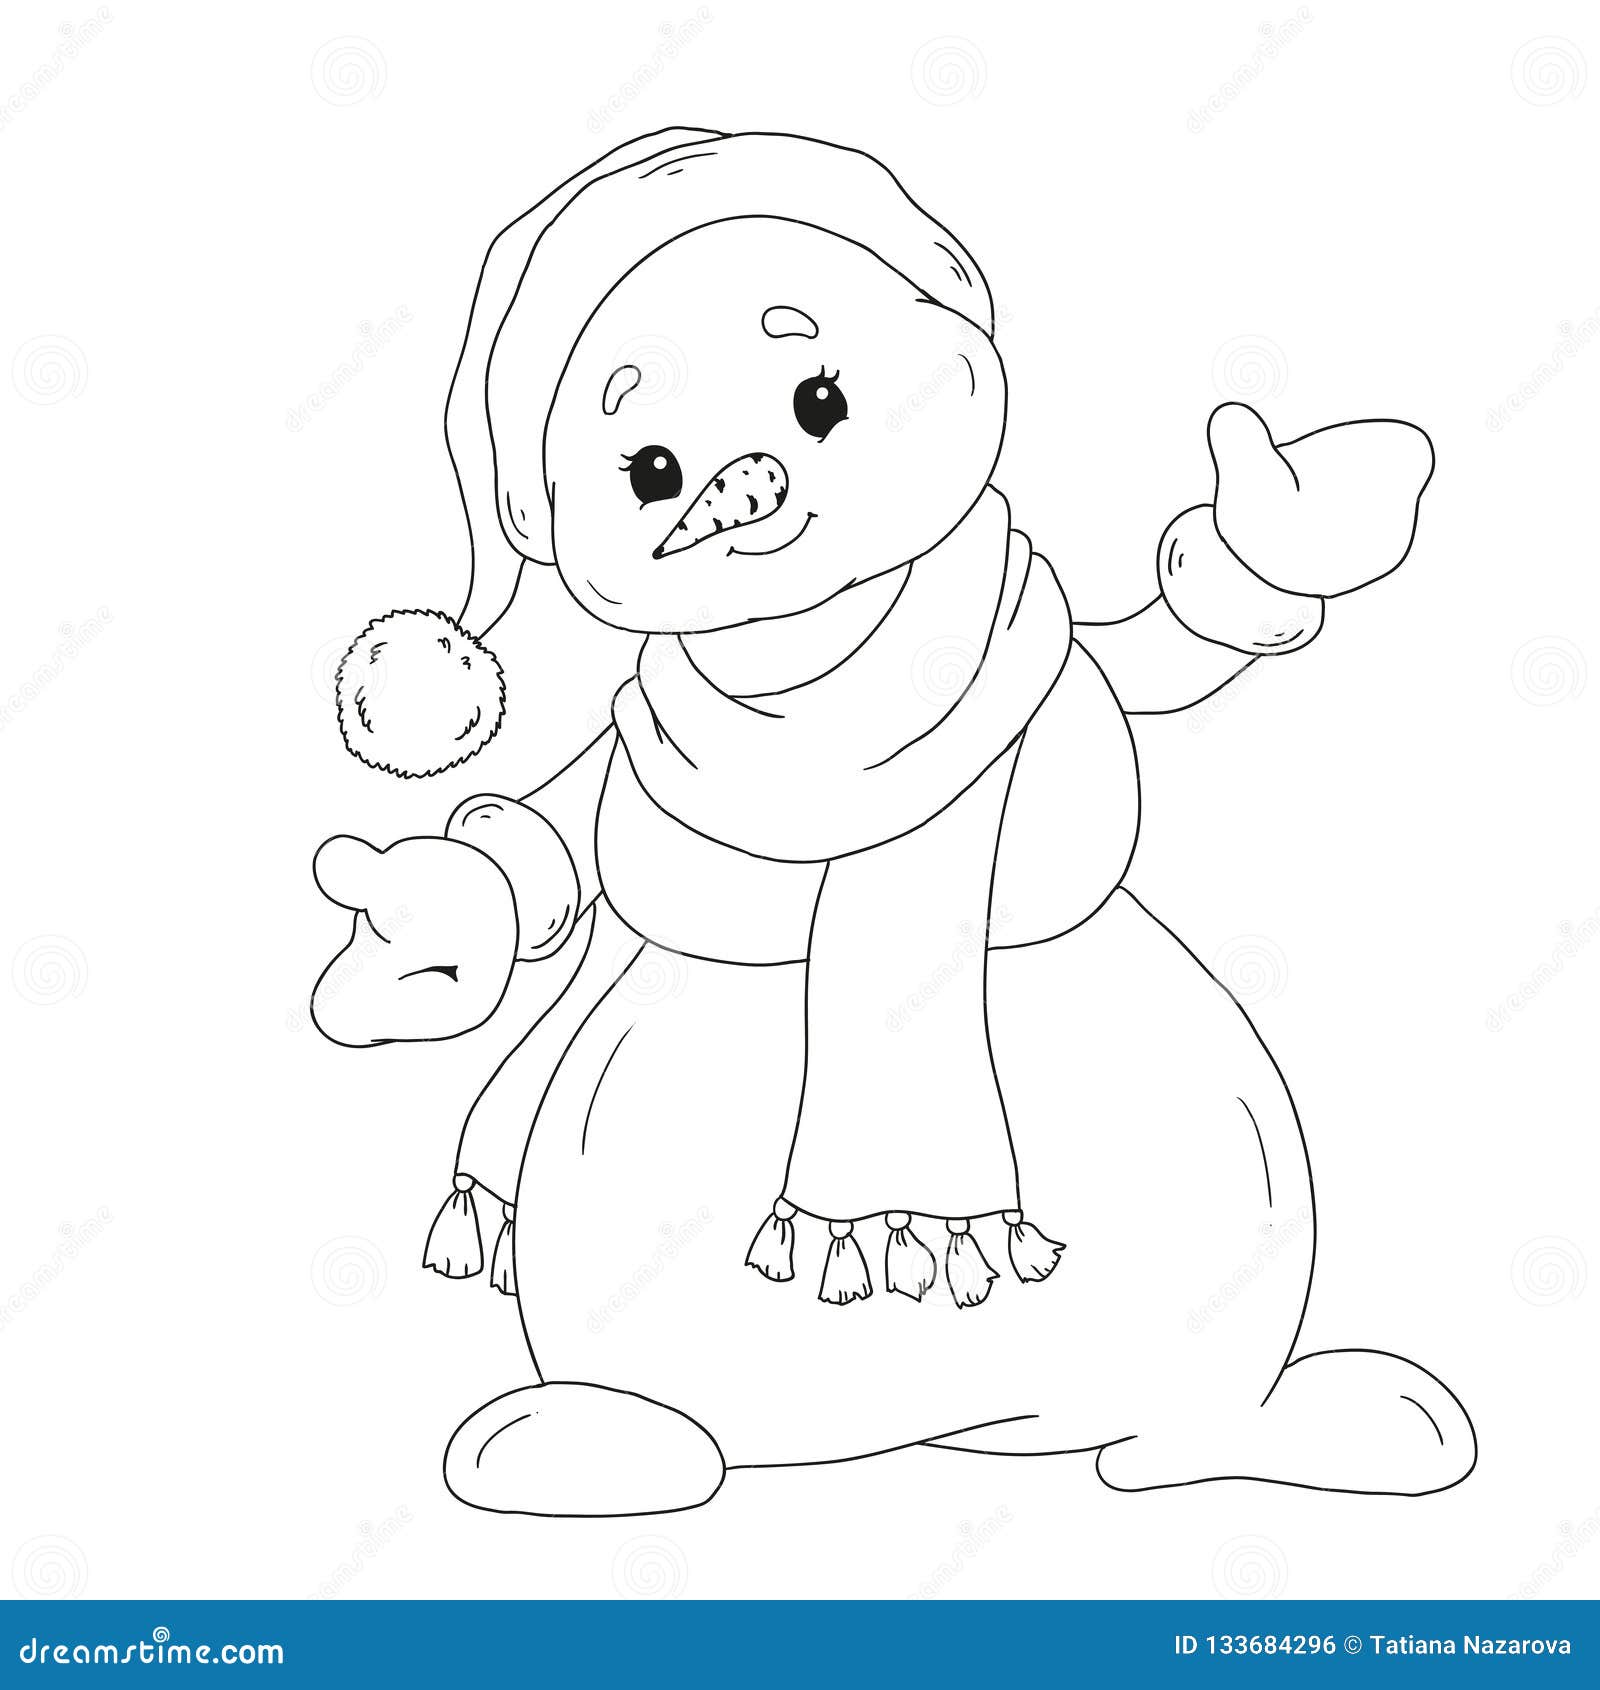 Snowman coloring book cute cartoon character snowman for childrens creativity snowman in a scarf stock illustration